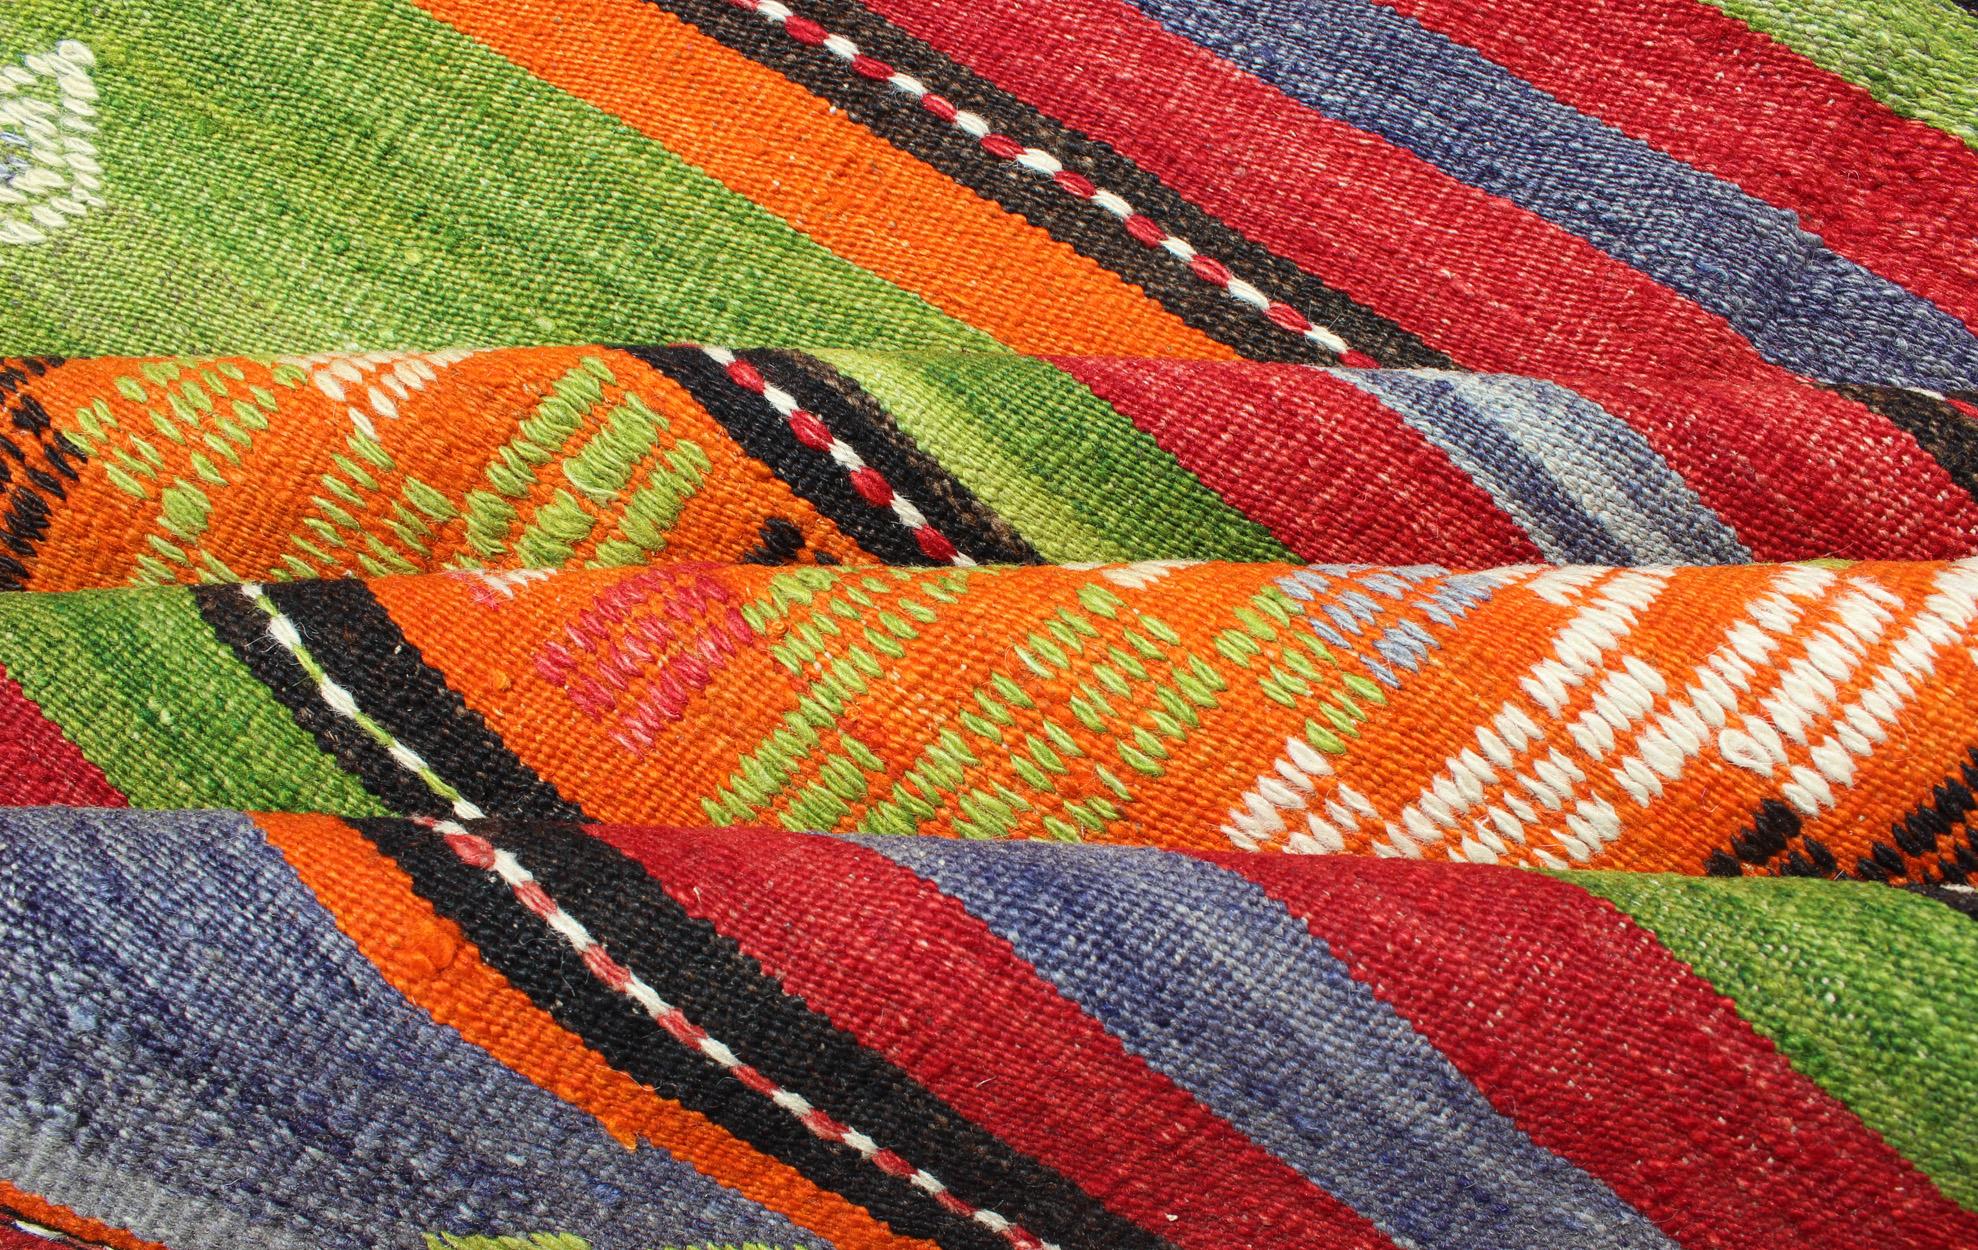  Colorful and Bright Turkish Kilim Rug with Stripe Geometric Design In Excellent Condition For Sale In Atlanta, GA